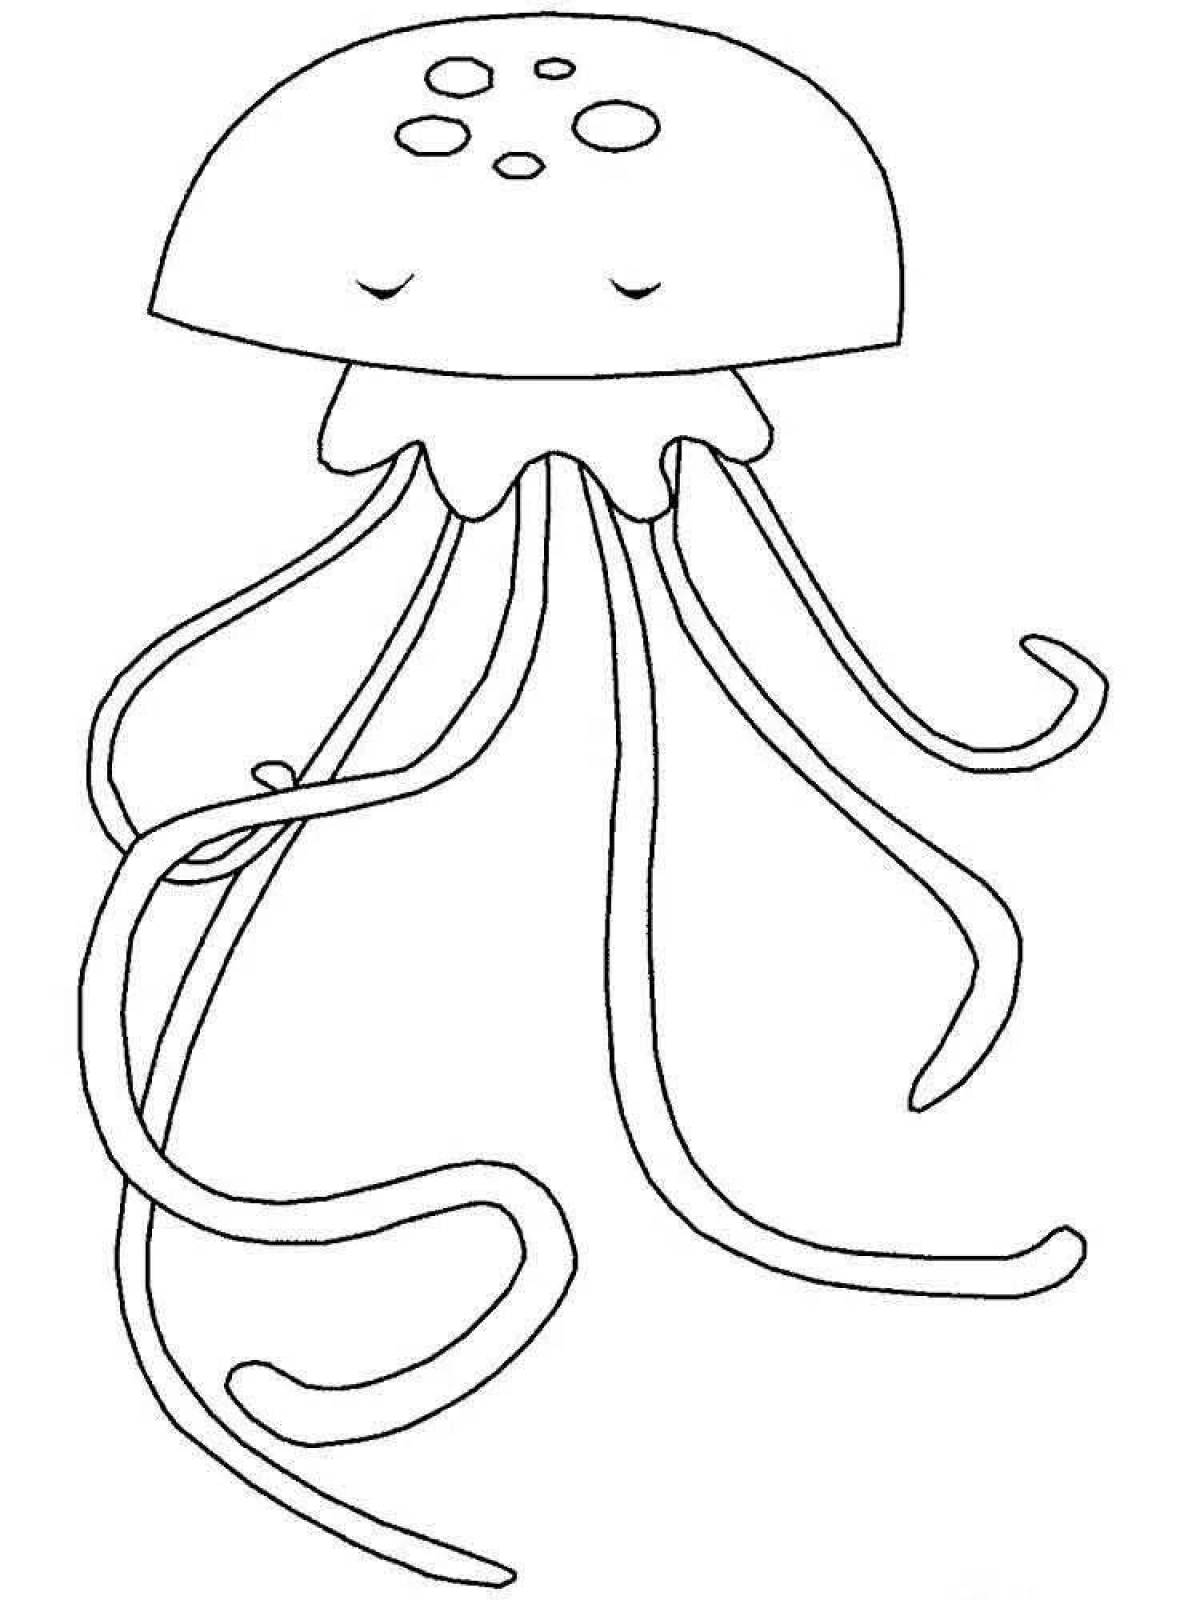 Outstanding jellyfish coloring page for kids